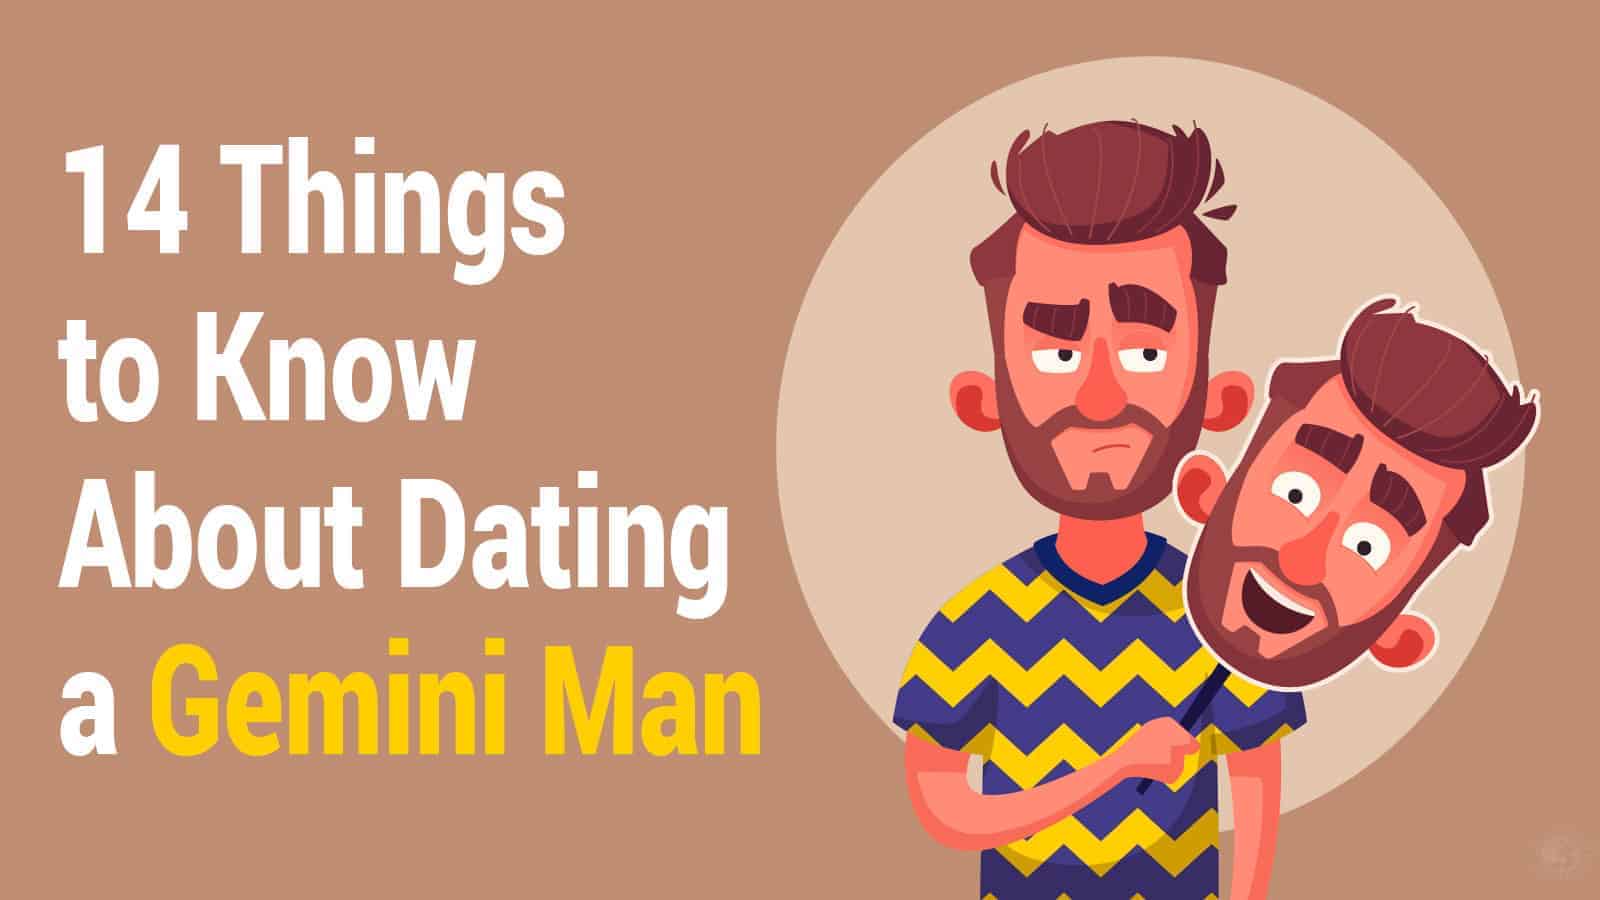 14 Things to Know About Dating a Gemini Man